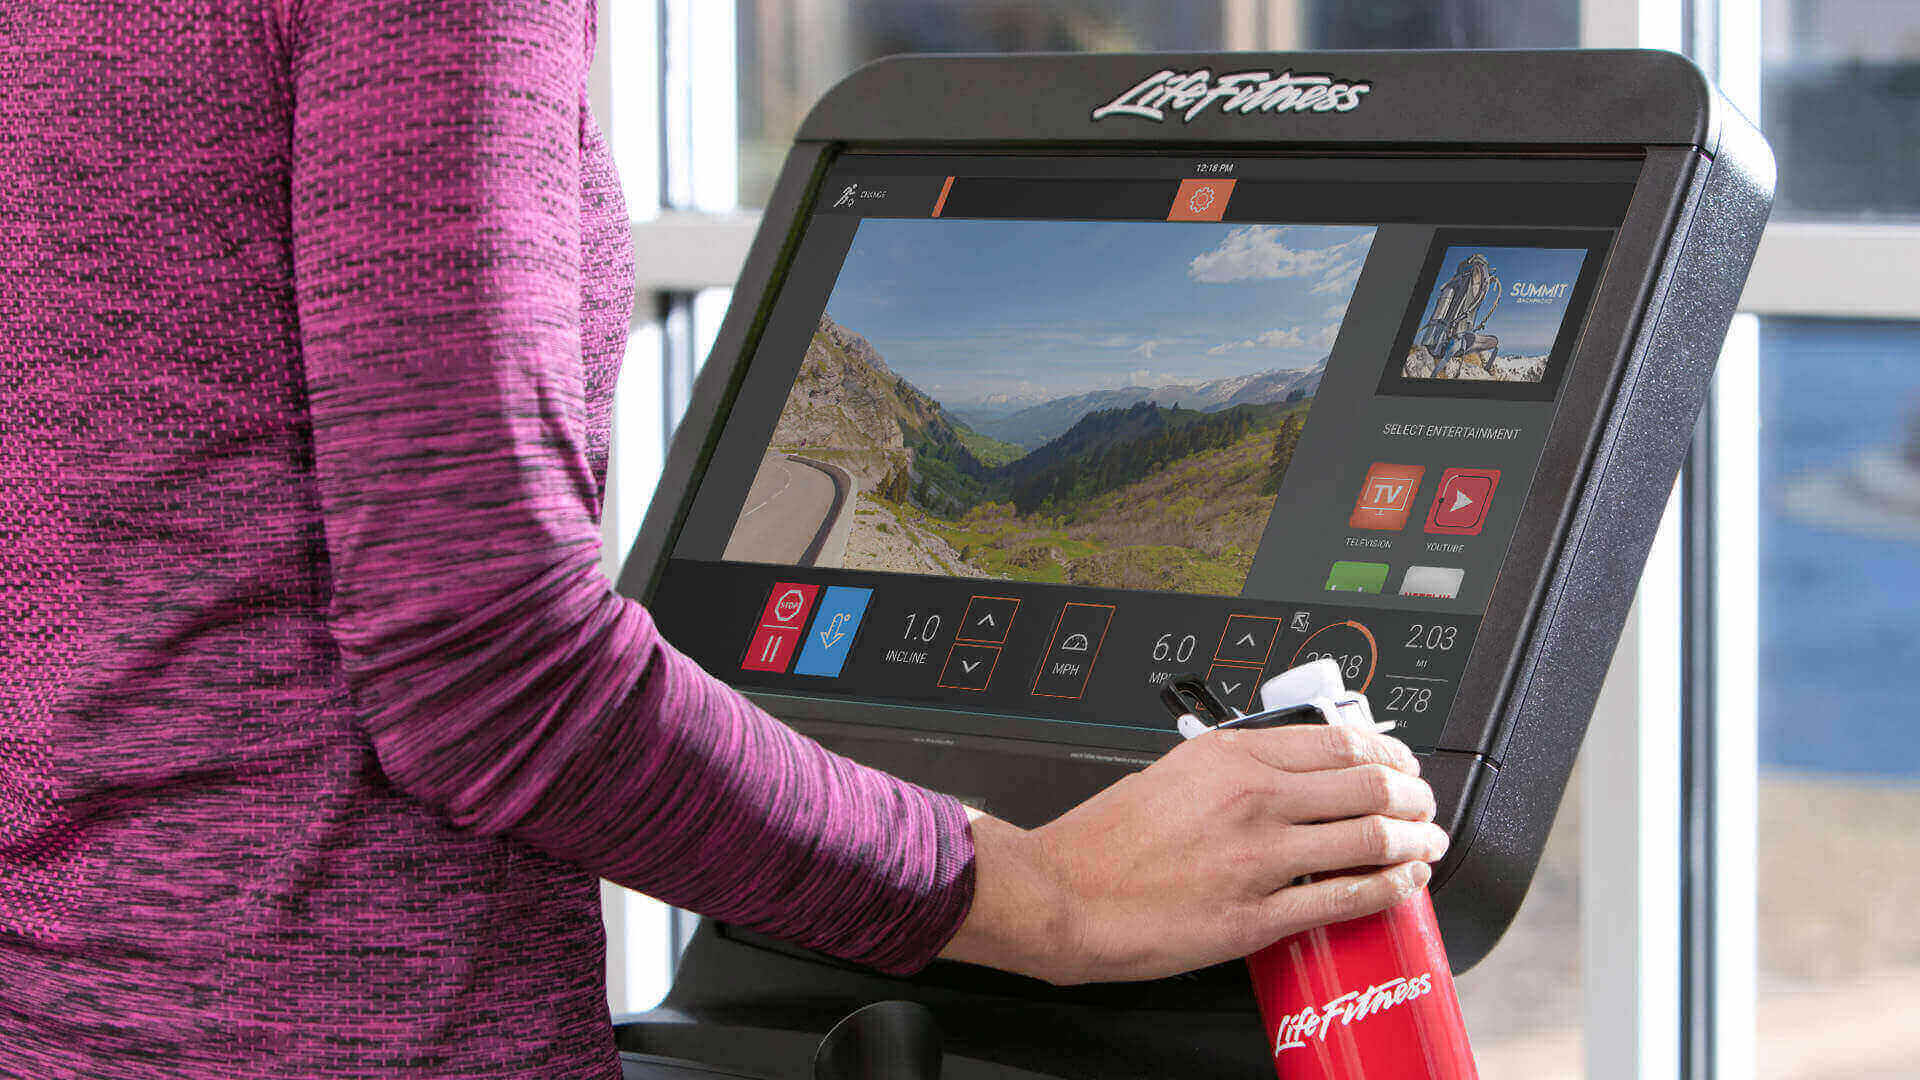 Life Fitness Launches New Digital Out-of-Home Network in Partnership with Vistar Media